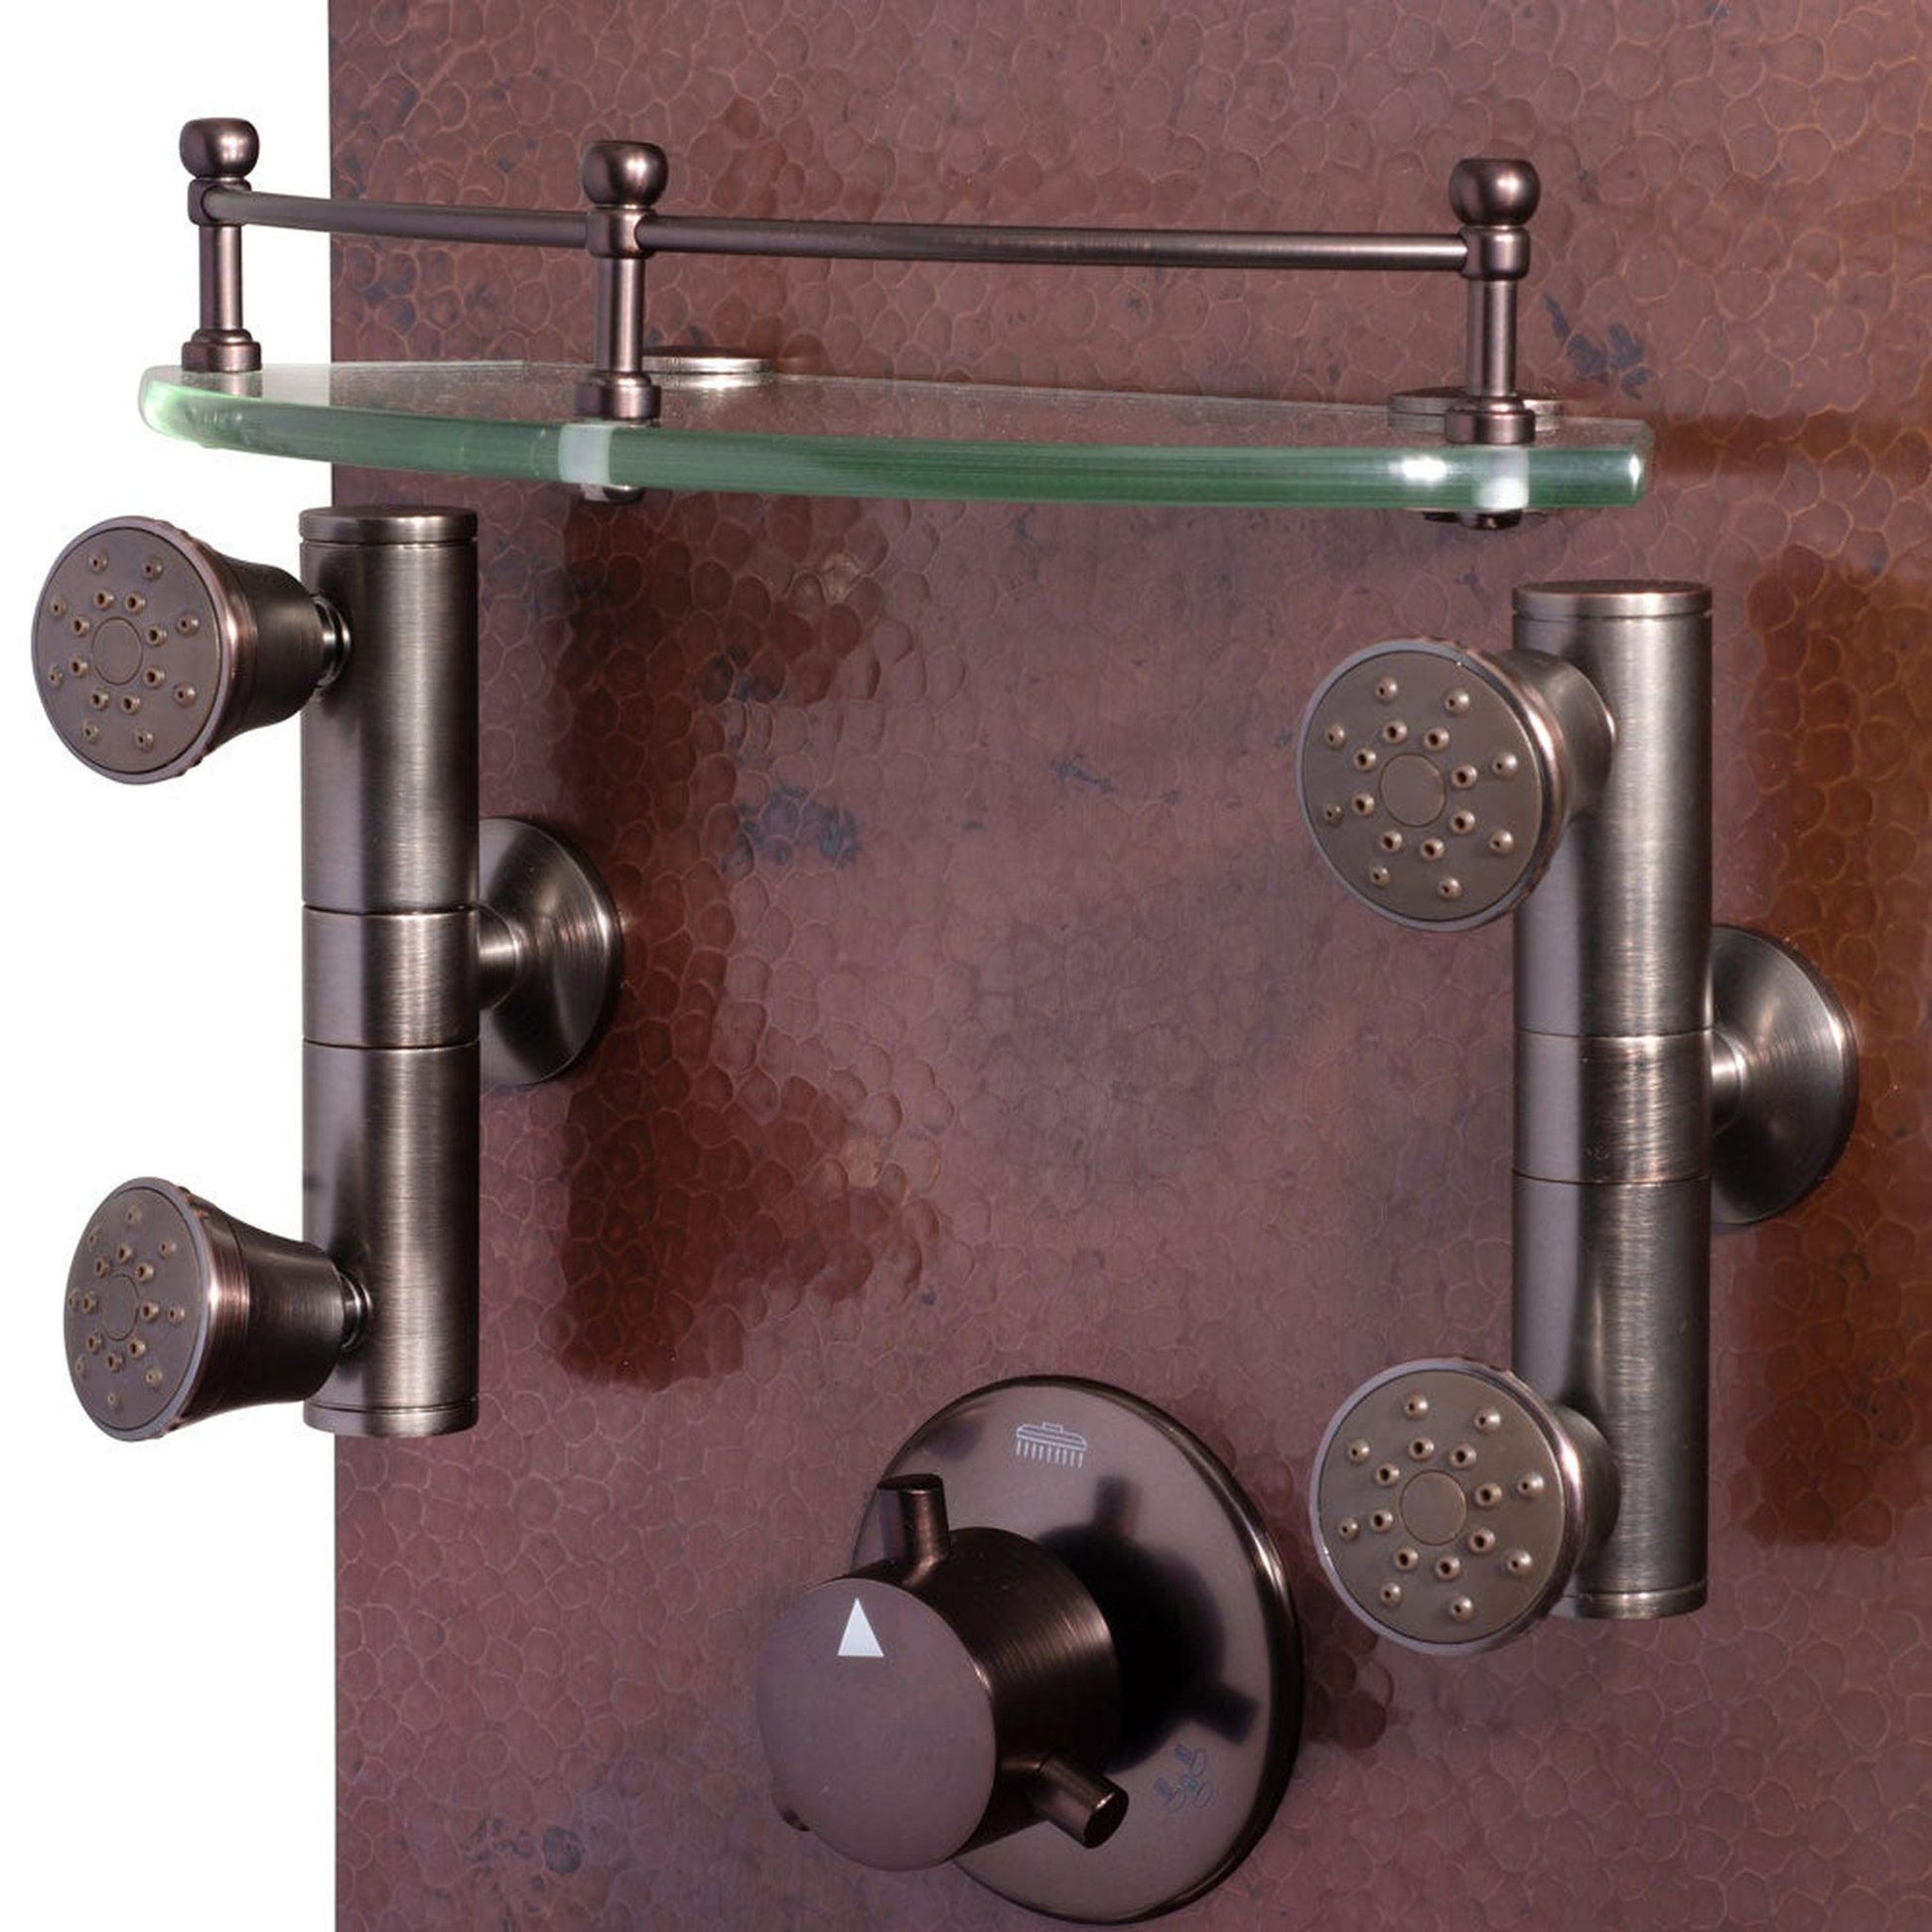 PULSE ShowerSpas Mojave 19" Hammered Copper Rain Shower Panel in Oil Rubbed Bronze Finish With 3-Function Body Jet and 5-Function Hand Shower